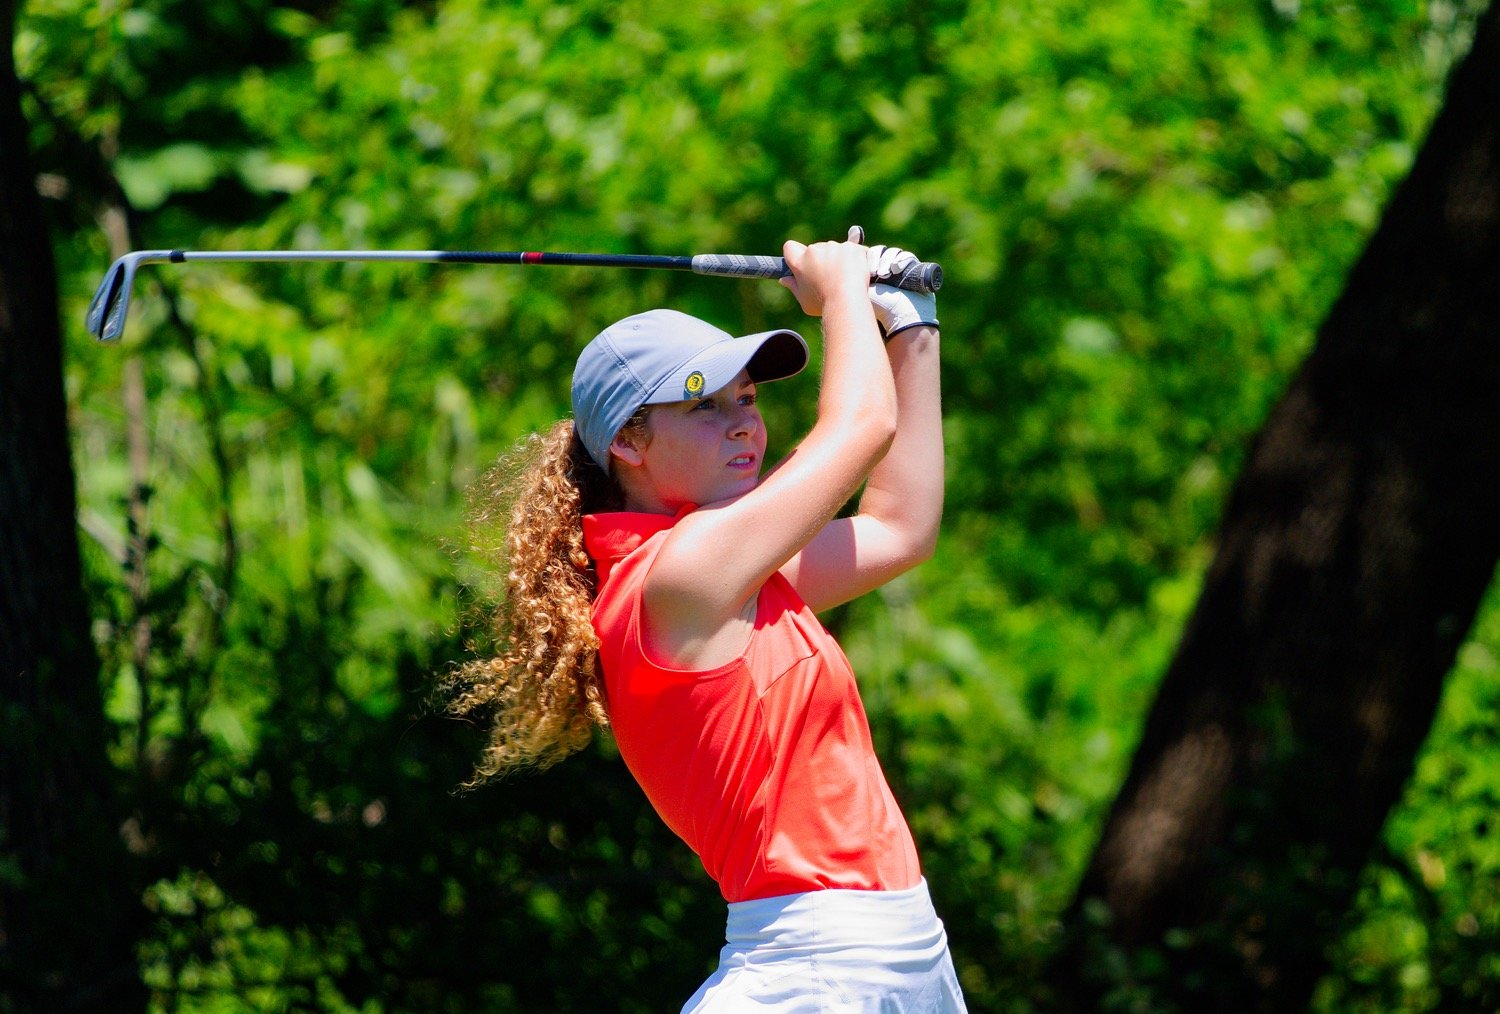 Sunni Ruffin holds her follow-through on a tee shot early in her back nine on her way to second-round 87. [see more orange on greens]